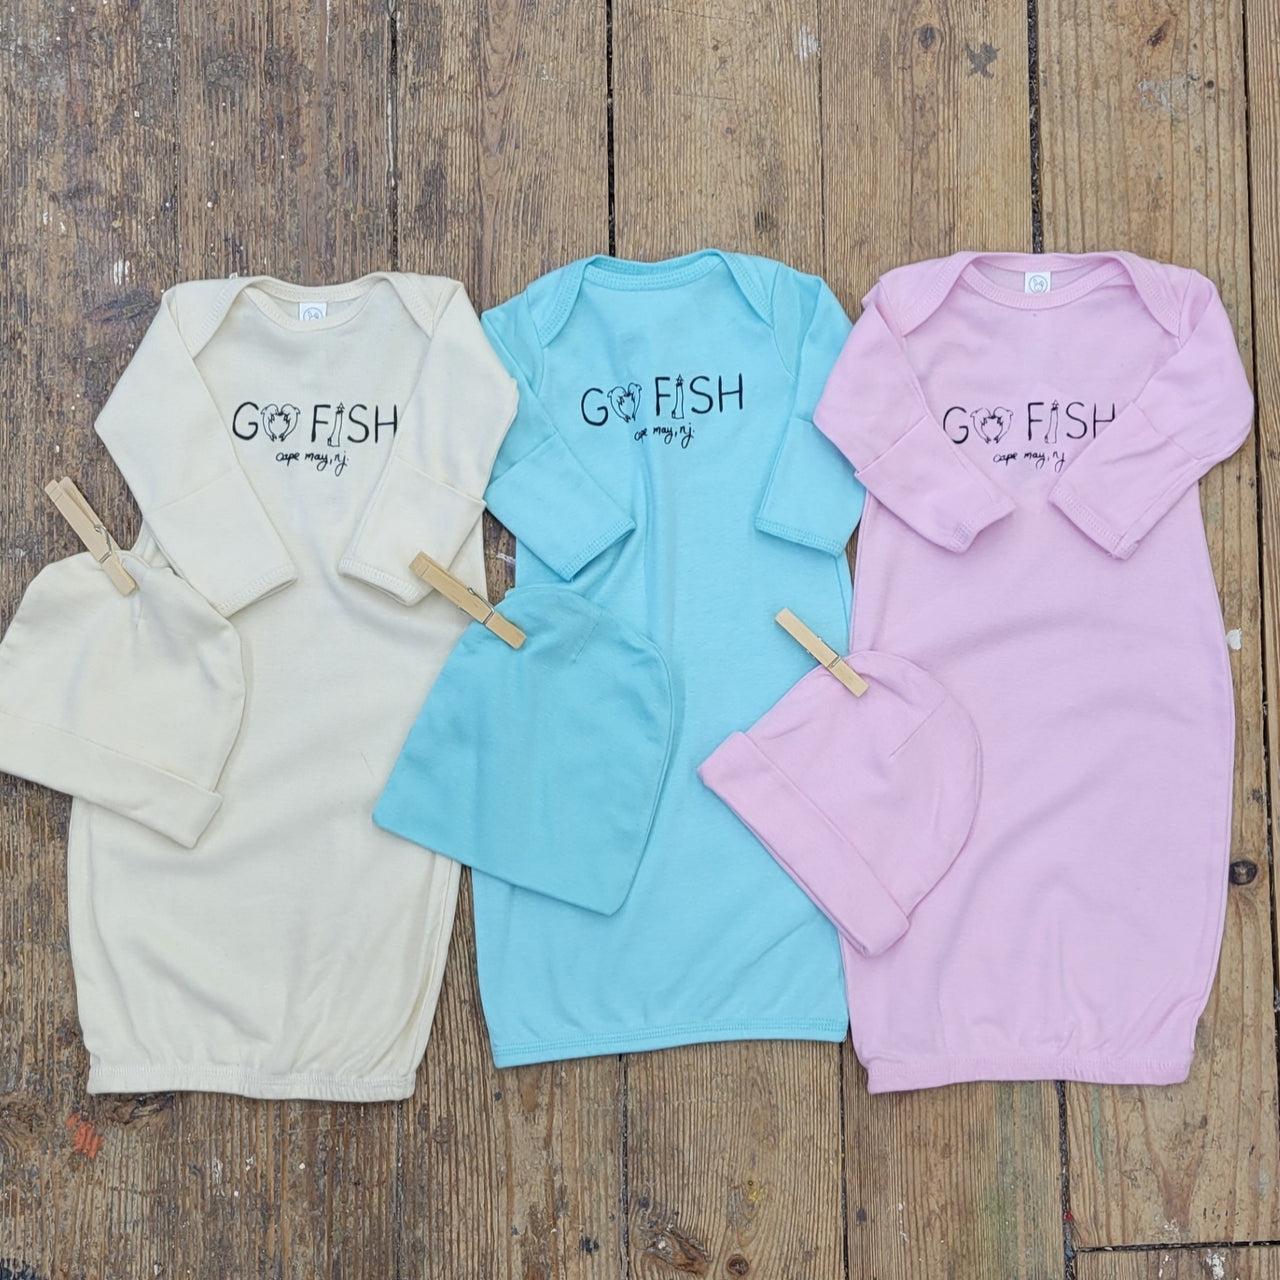 Three sets of baby layettes in cream, blue and pink featuring a 'Go fish! Cape May' design in black ink.